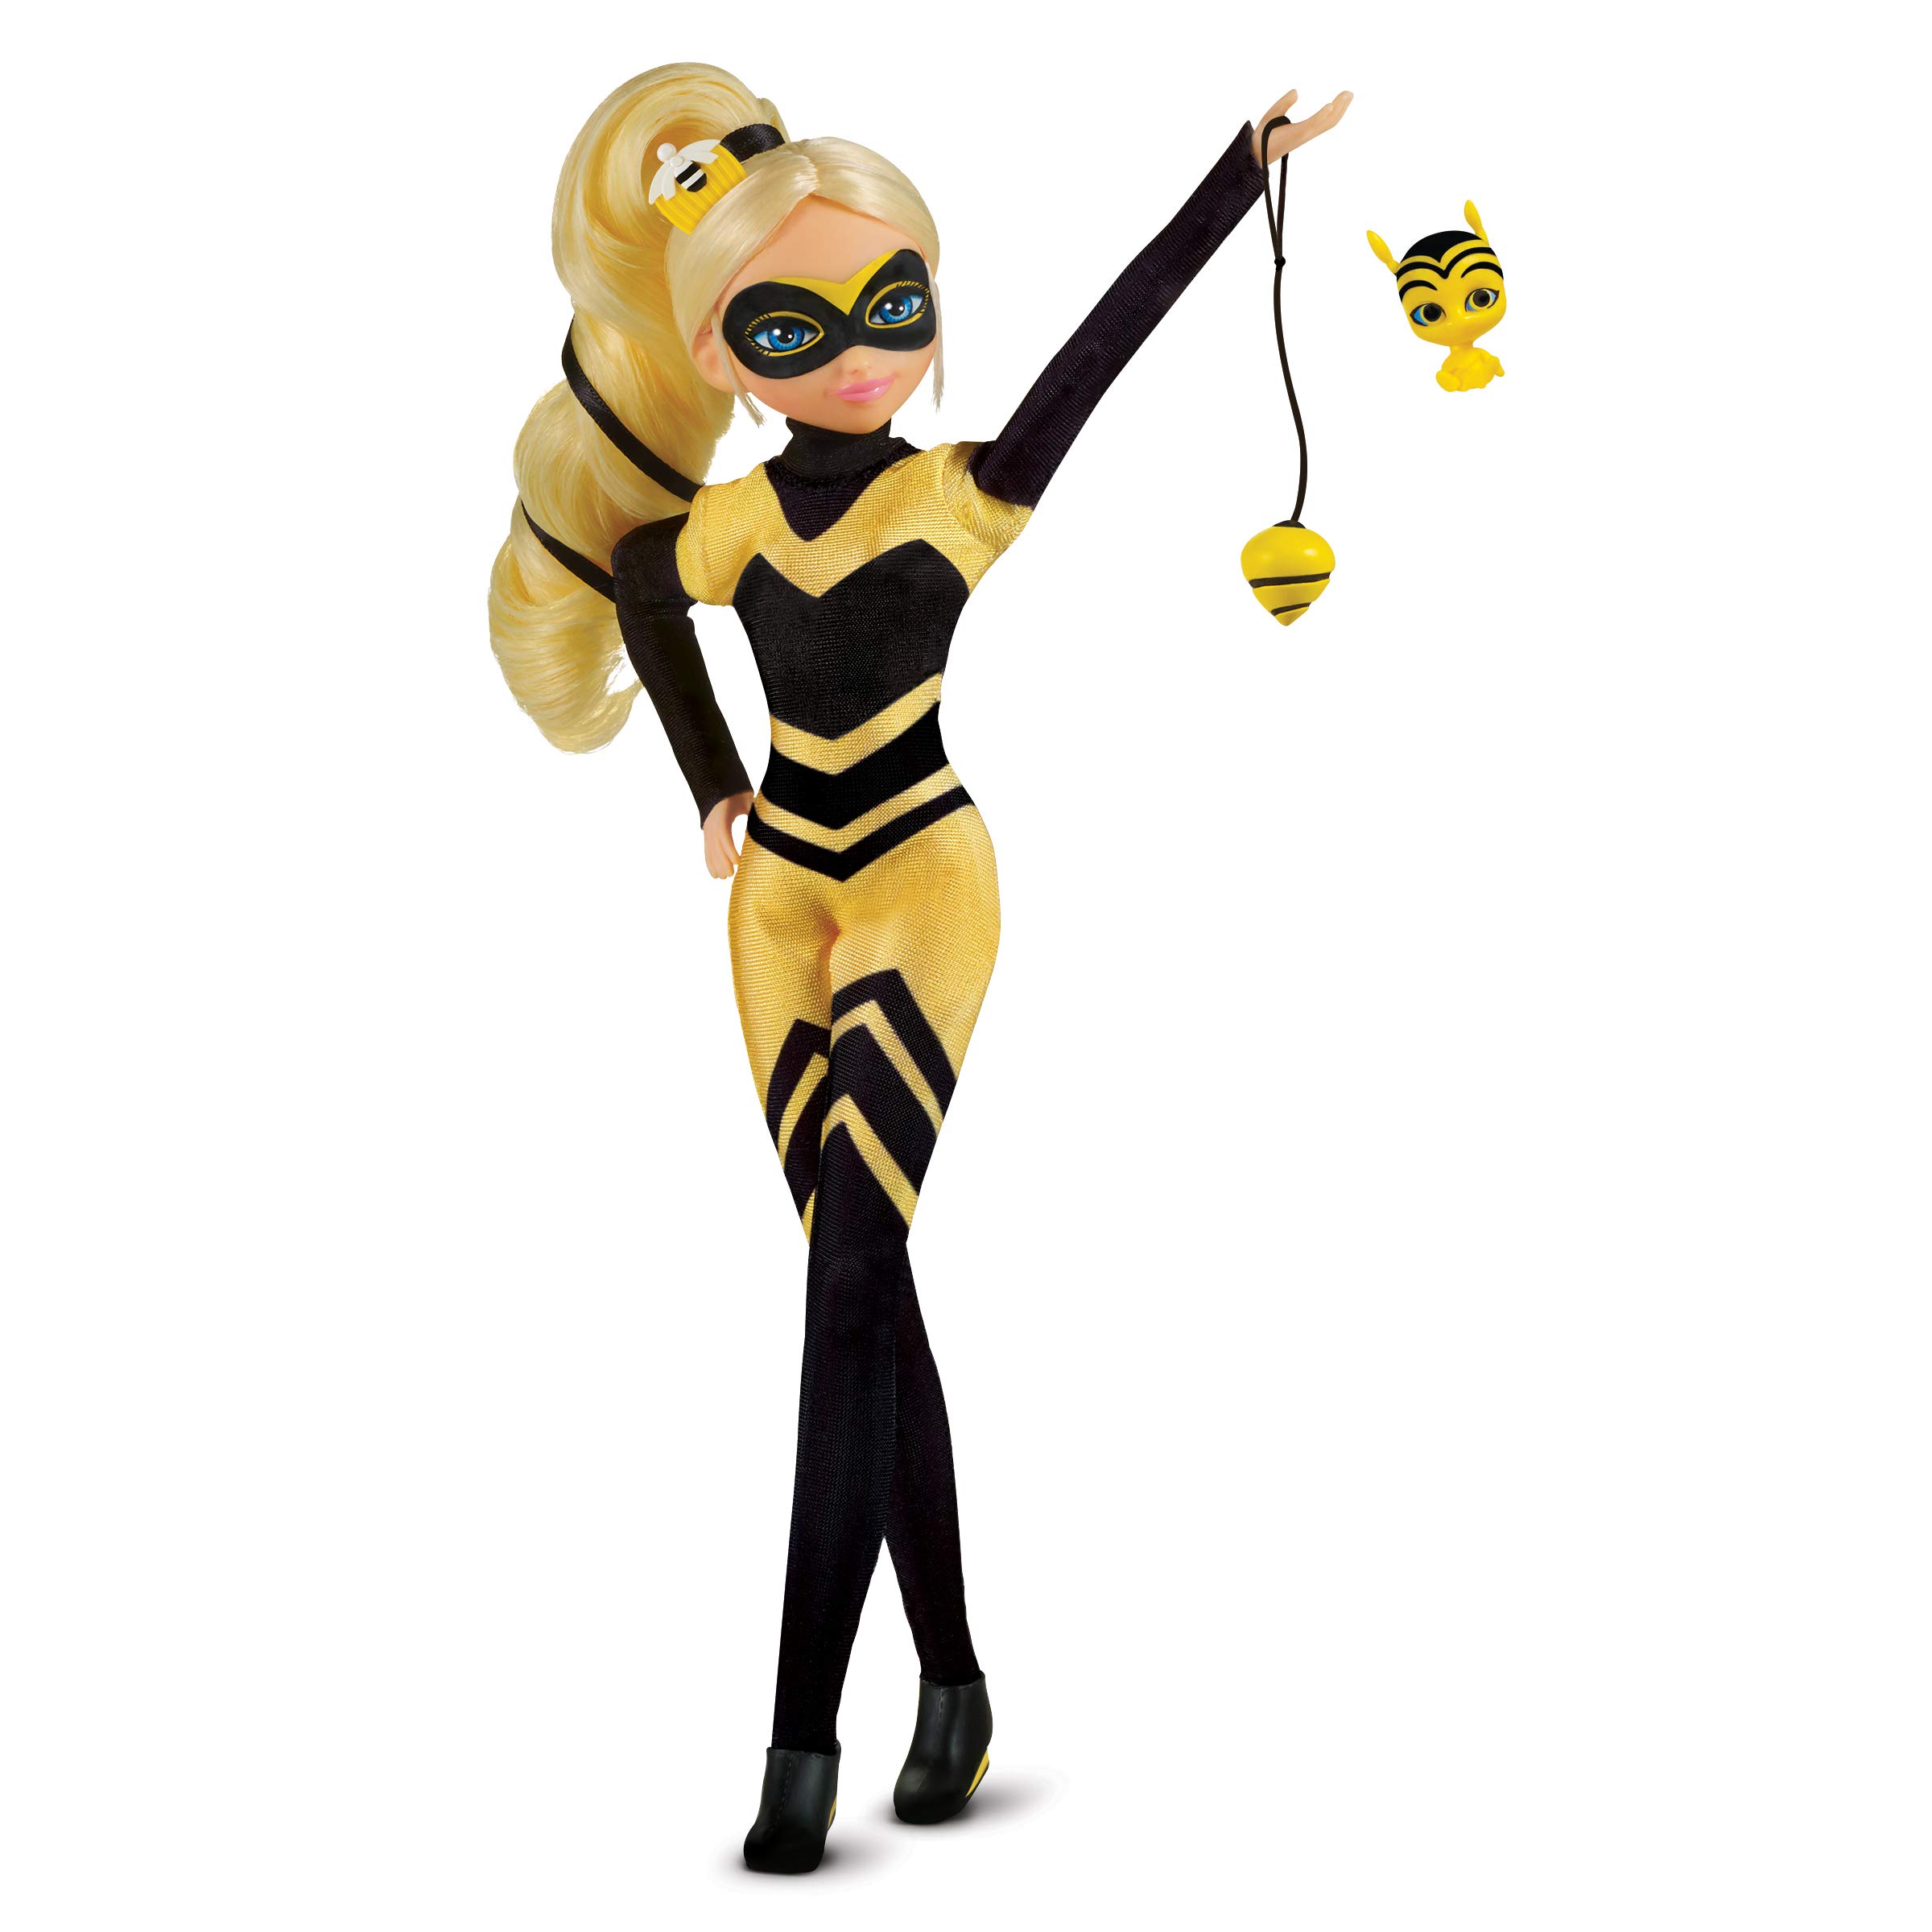 Miraculous P50003 Queen Bee Fashion Doll